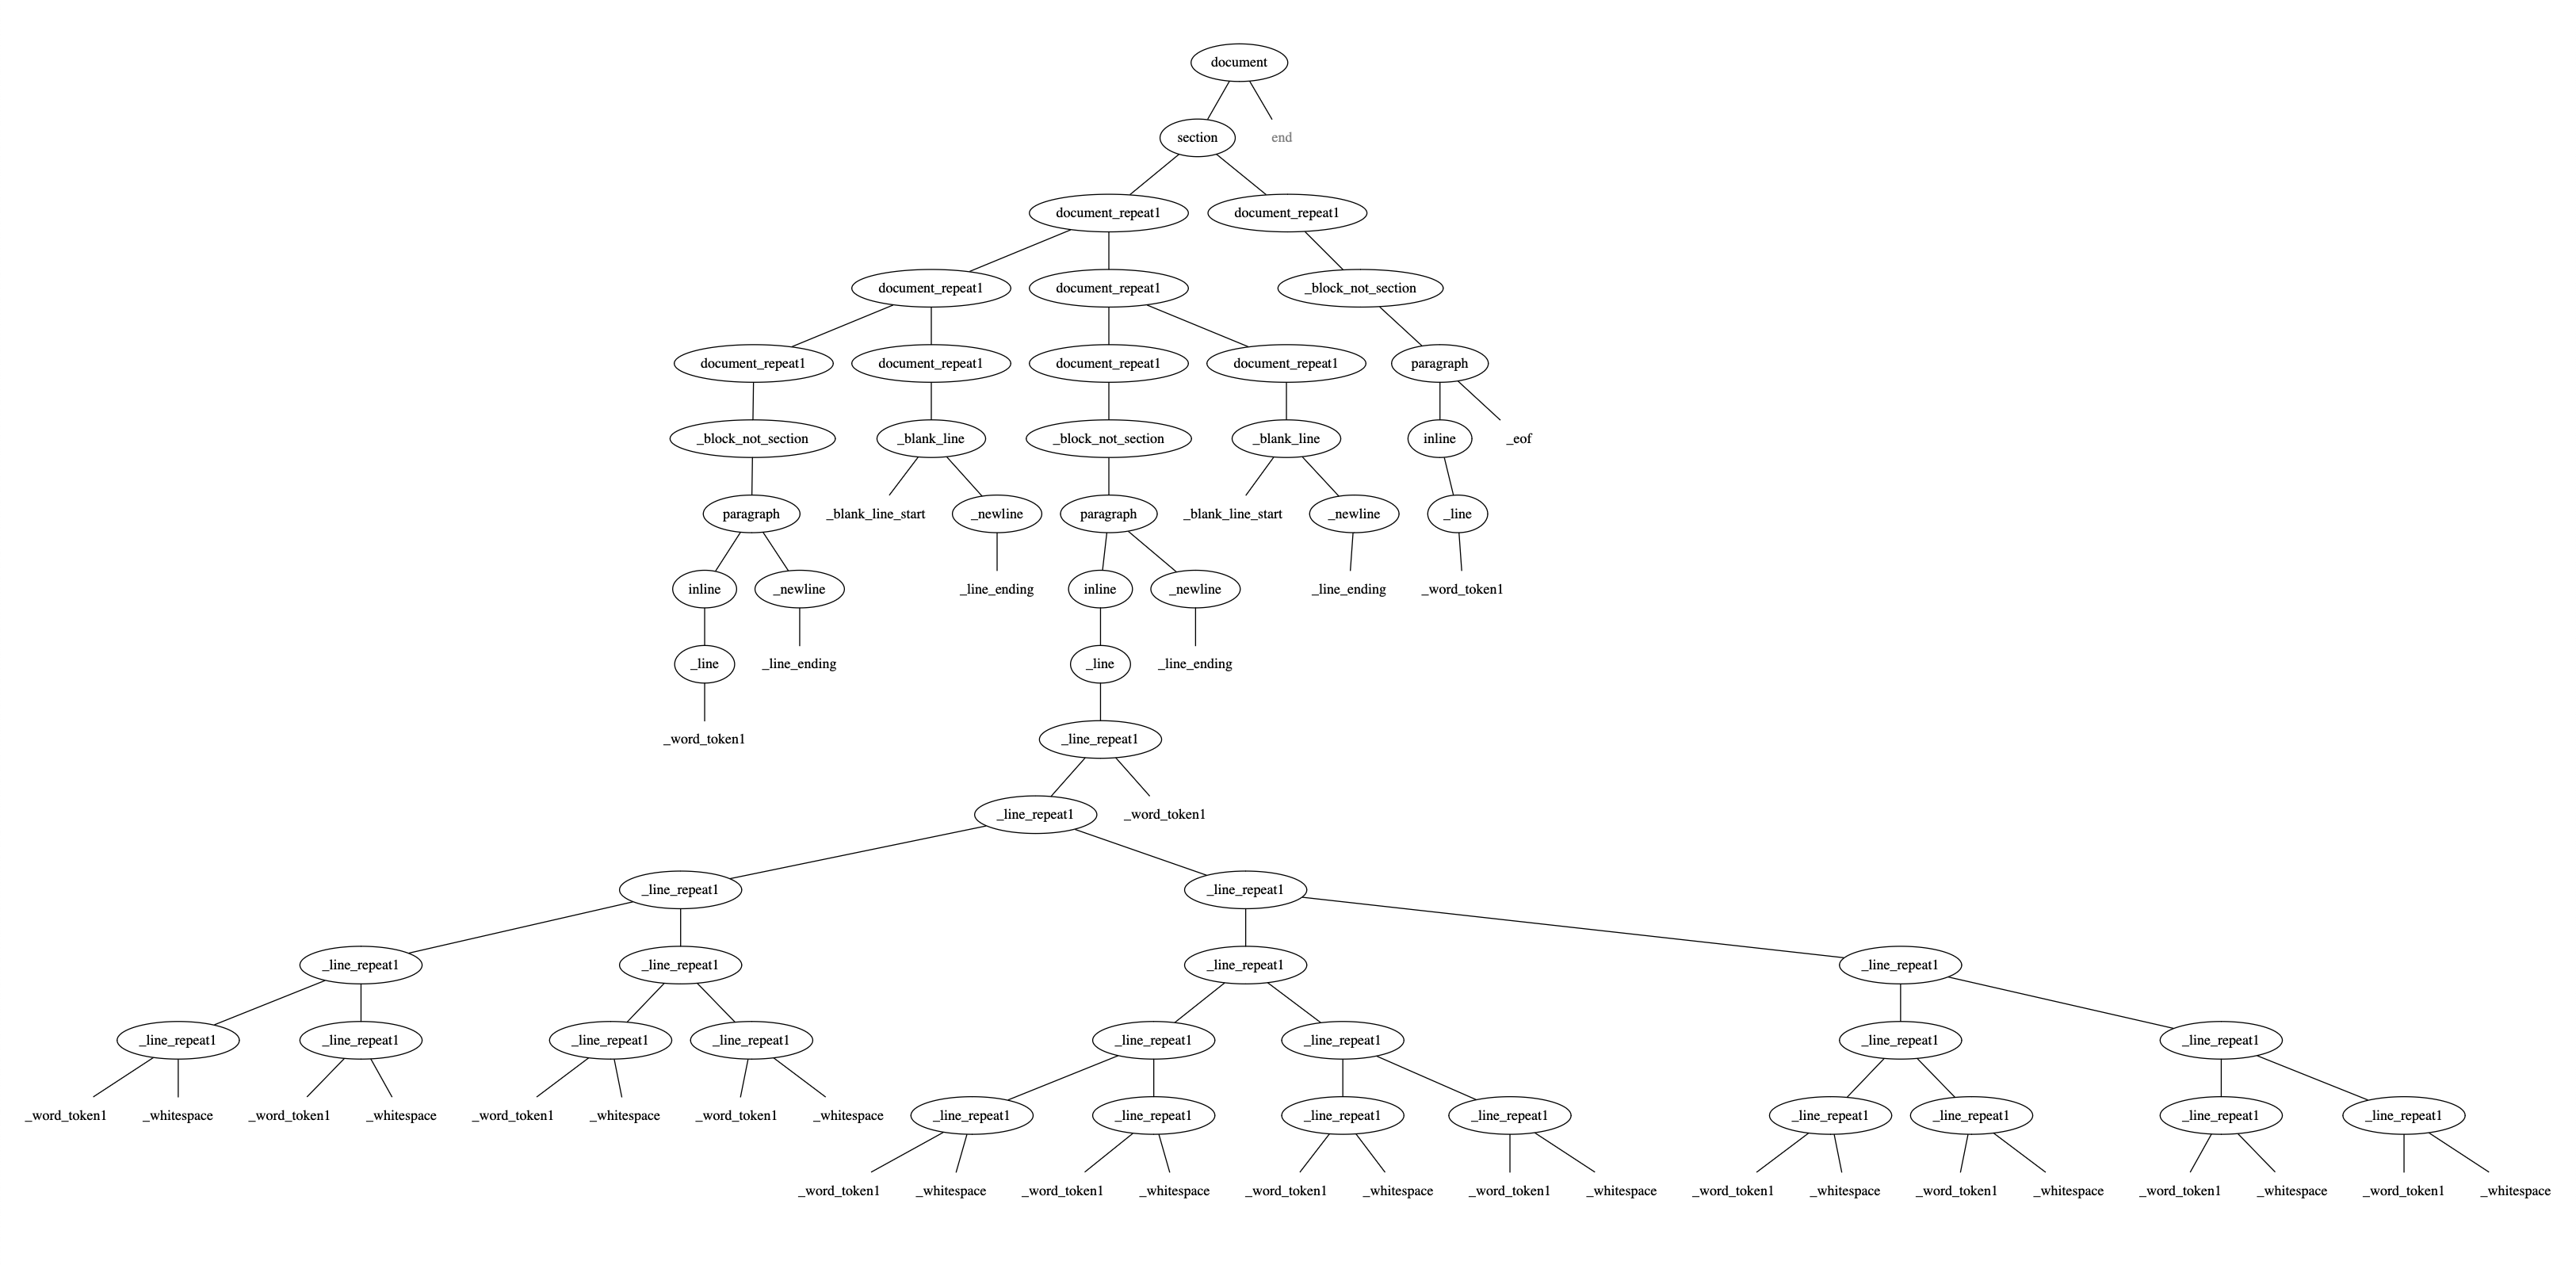 screenshot of a generated tree graph representing a text document's content